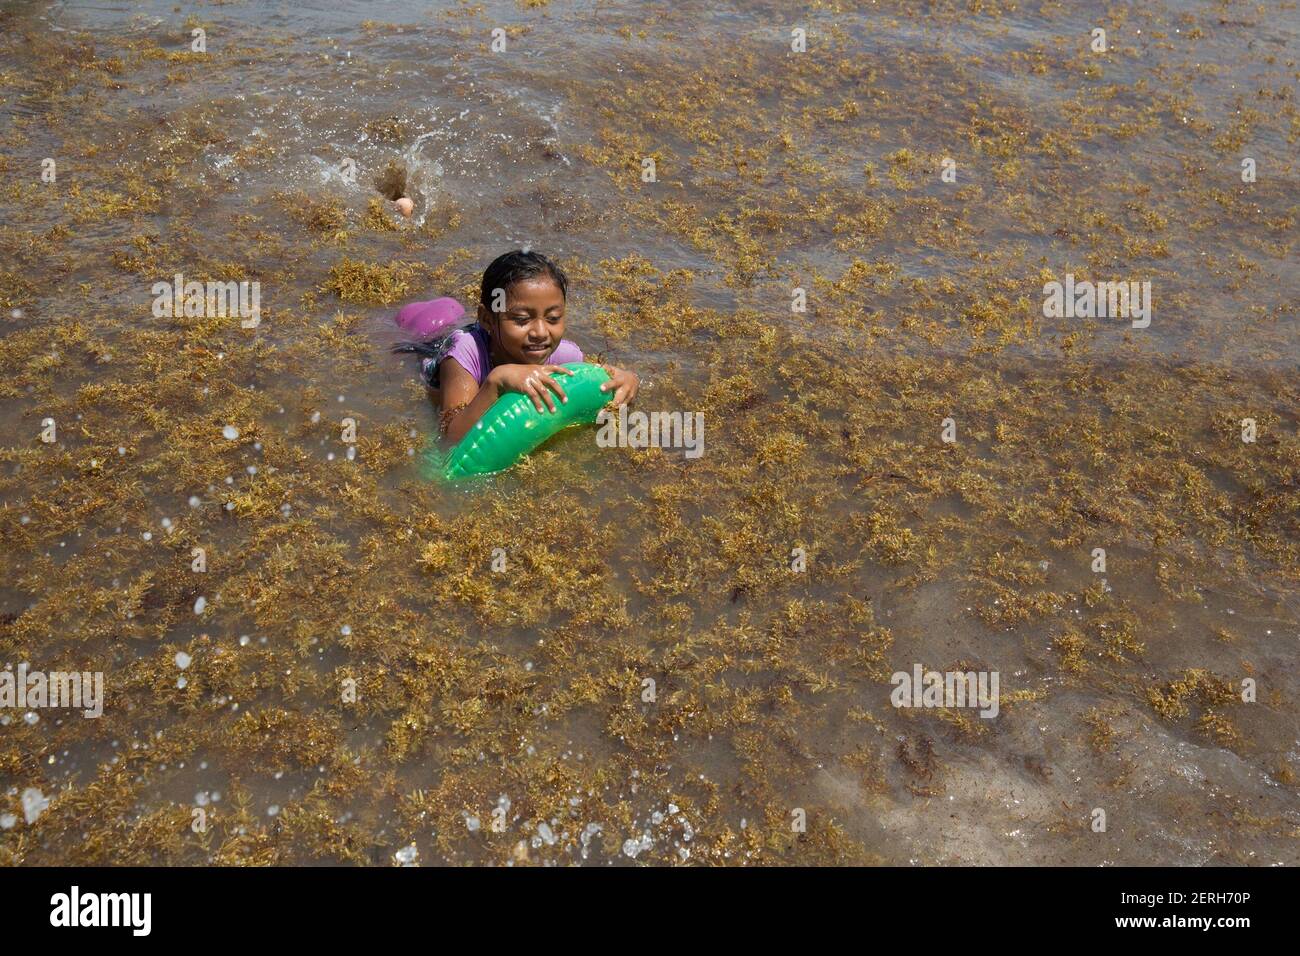 A young girl swims on a beach full of Sargassum seaweed in Mamitas Beach in Playa del Carmen, Quintana Roo state, Mexico on August 19, 2018. Sargassum—a brown seaweed that lives in the open ocean—has overwhelmed shorelines along the East Coast of the United States, Gulf of Mexico, and the Caribbean. Researchers say that the Sargassum outbreak started in 2011, but it has become worse over the years and could cause a serious environmental disaster. As the Sargassum is cleaned up on the shorelines, in a matter of days the shorelines are once again filled. When the Sargassum seaweed lands and star Stock Photo